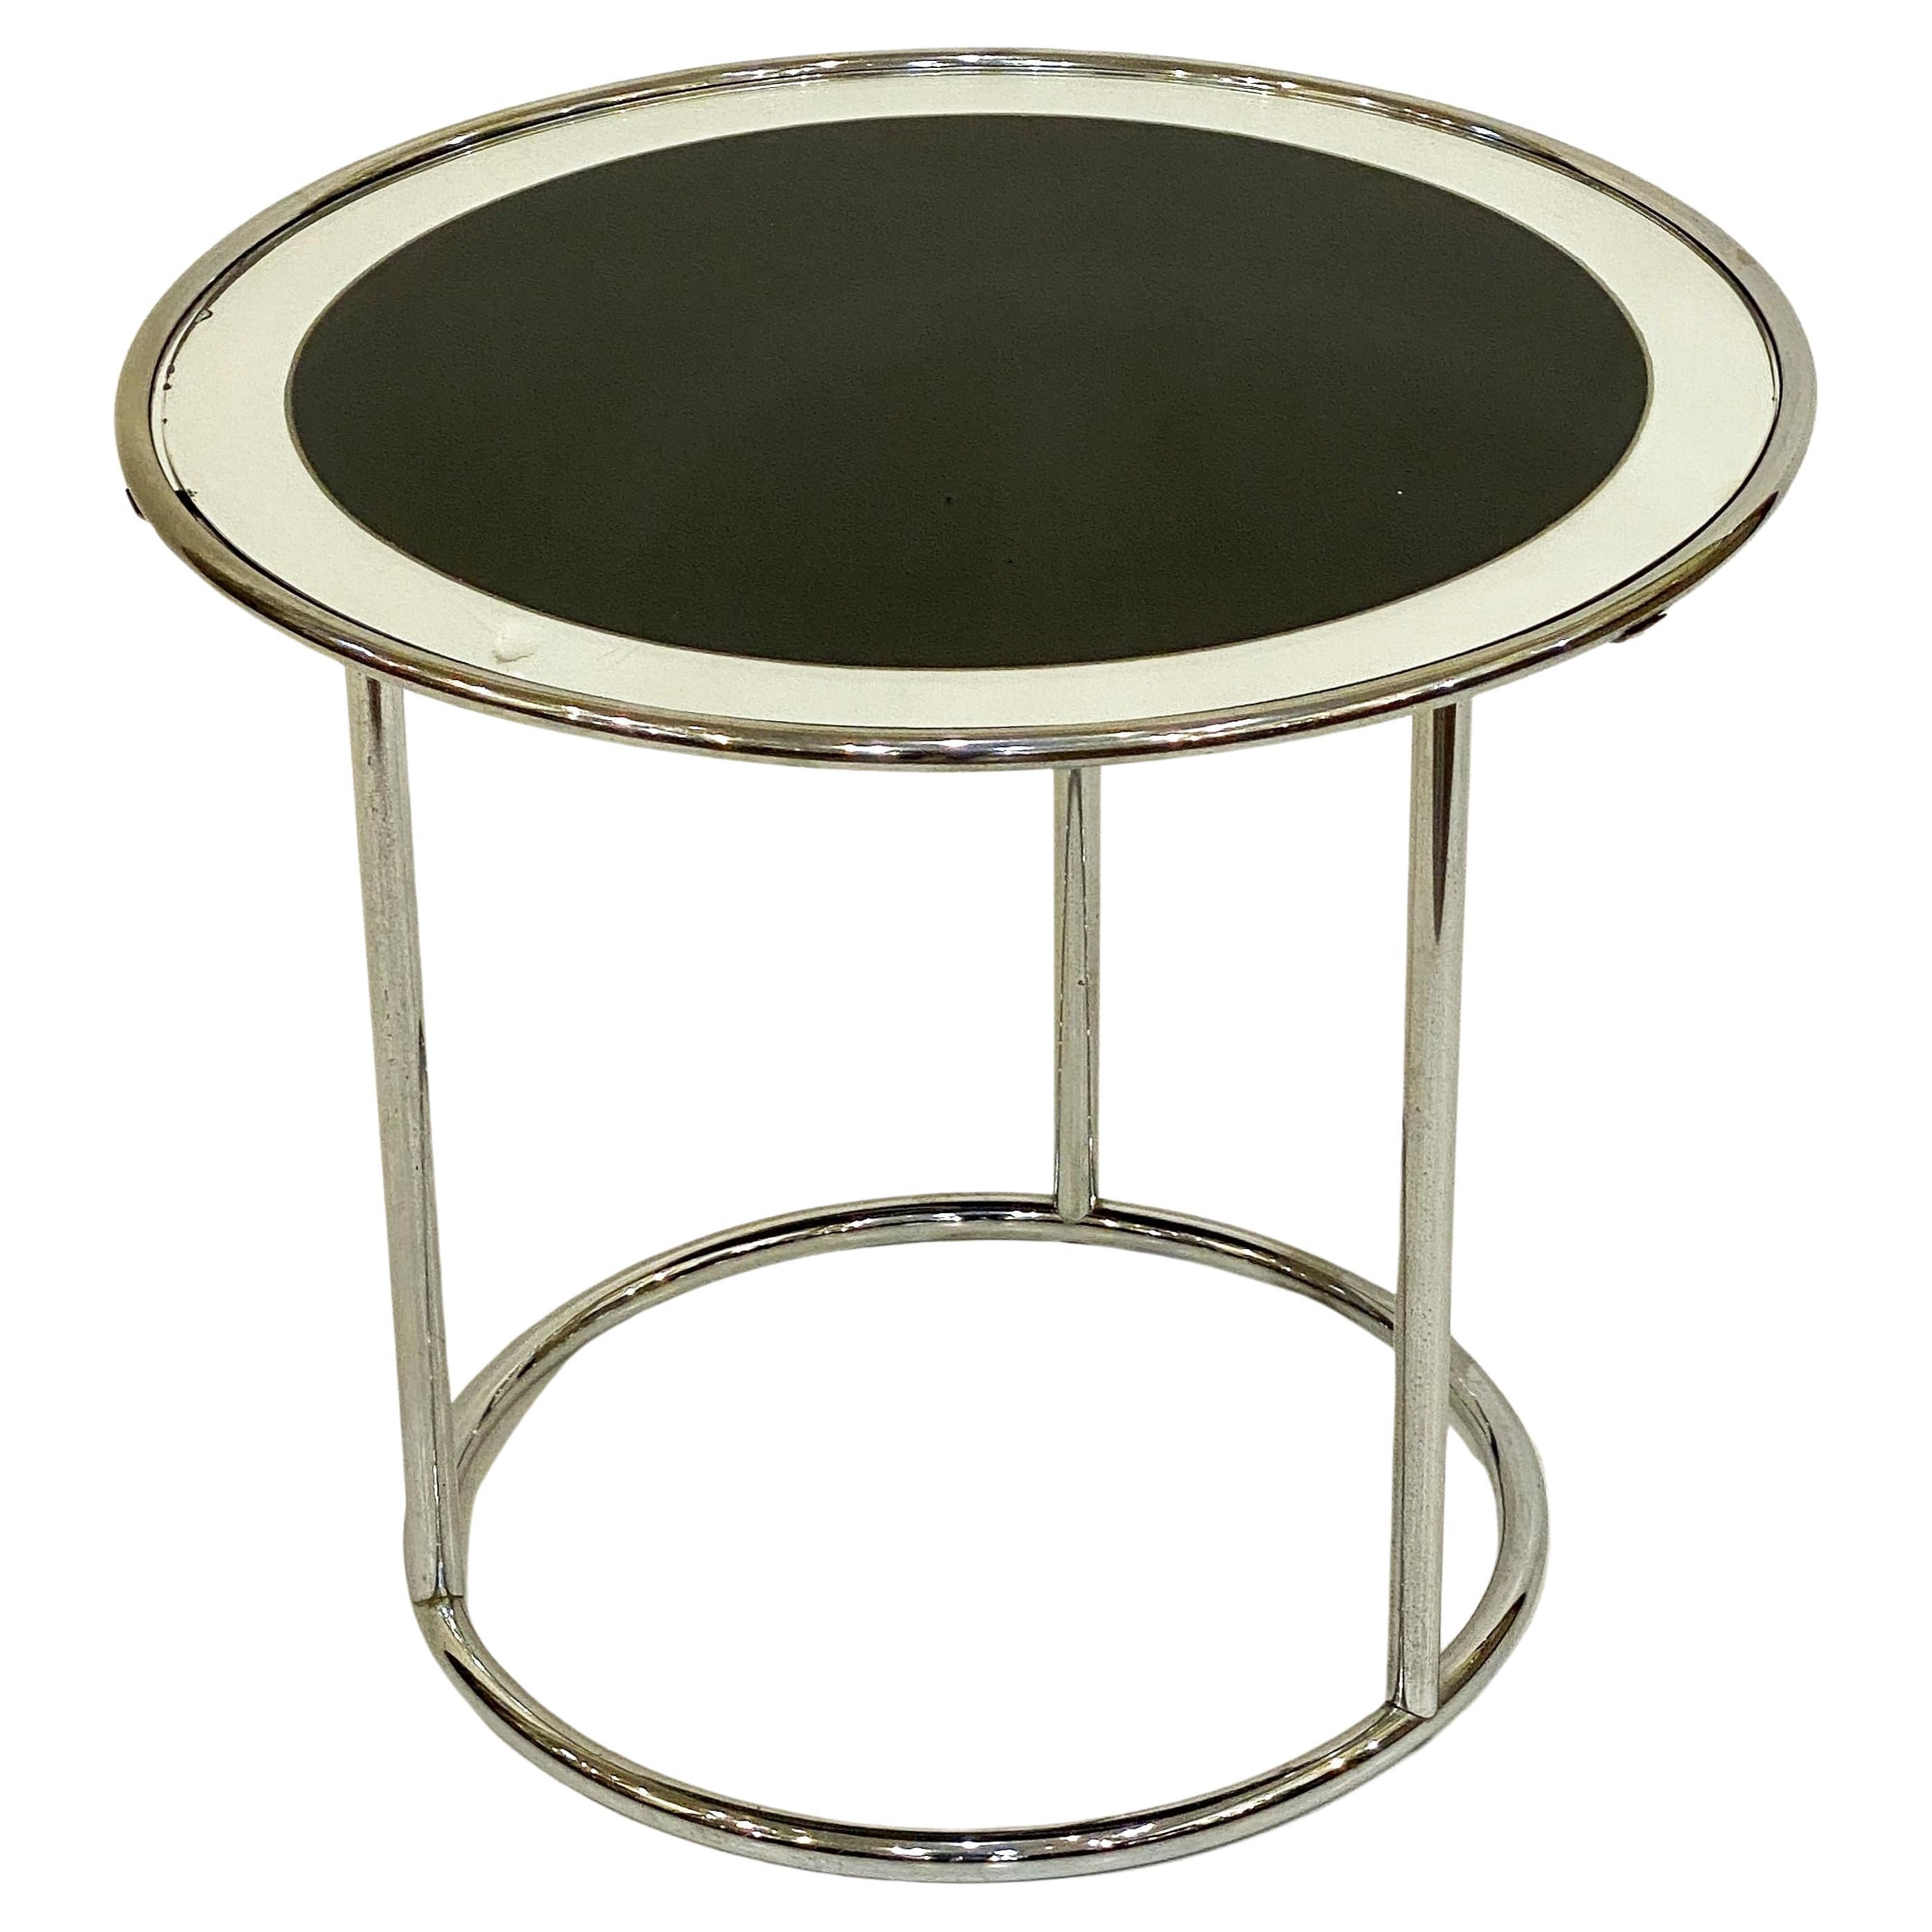 Art Deco Round Drinks Table of Chrome and Mirrored Glass from England